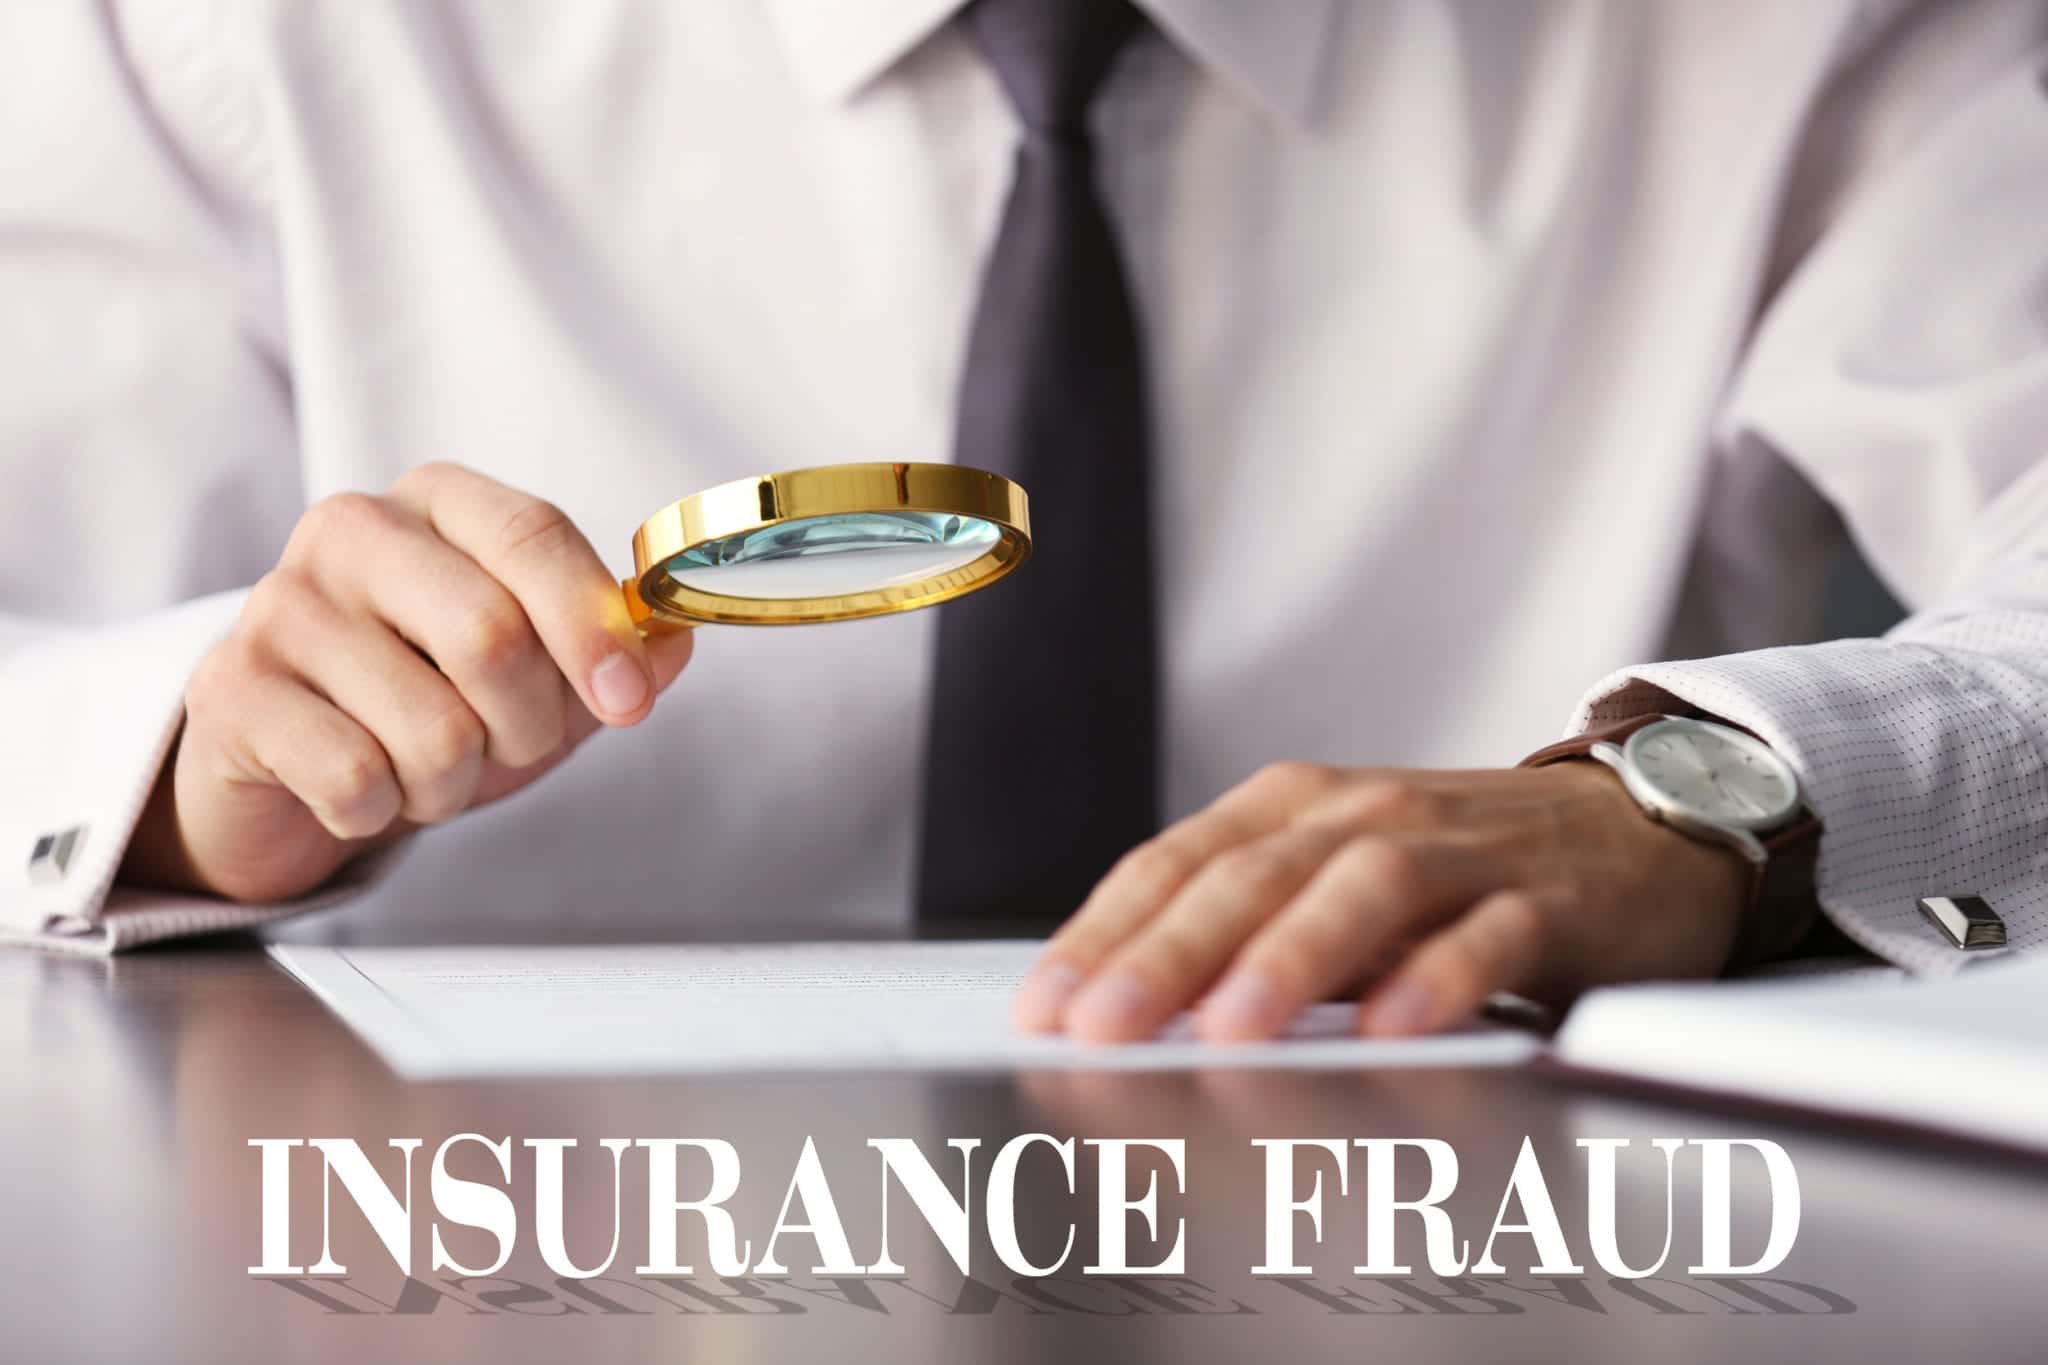 Insurance Fraud Laws in Nevada